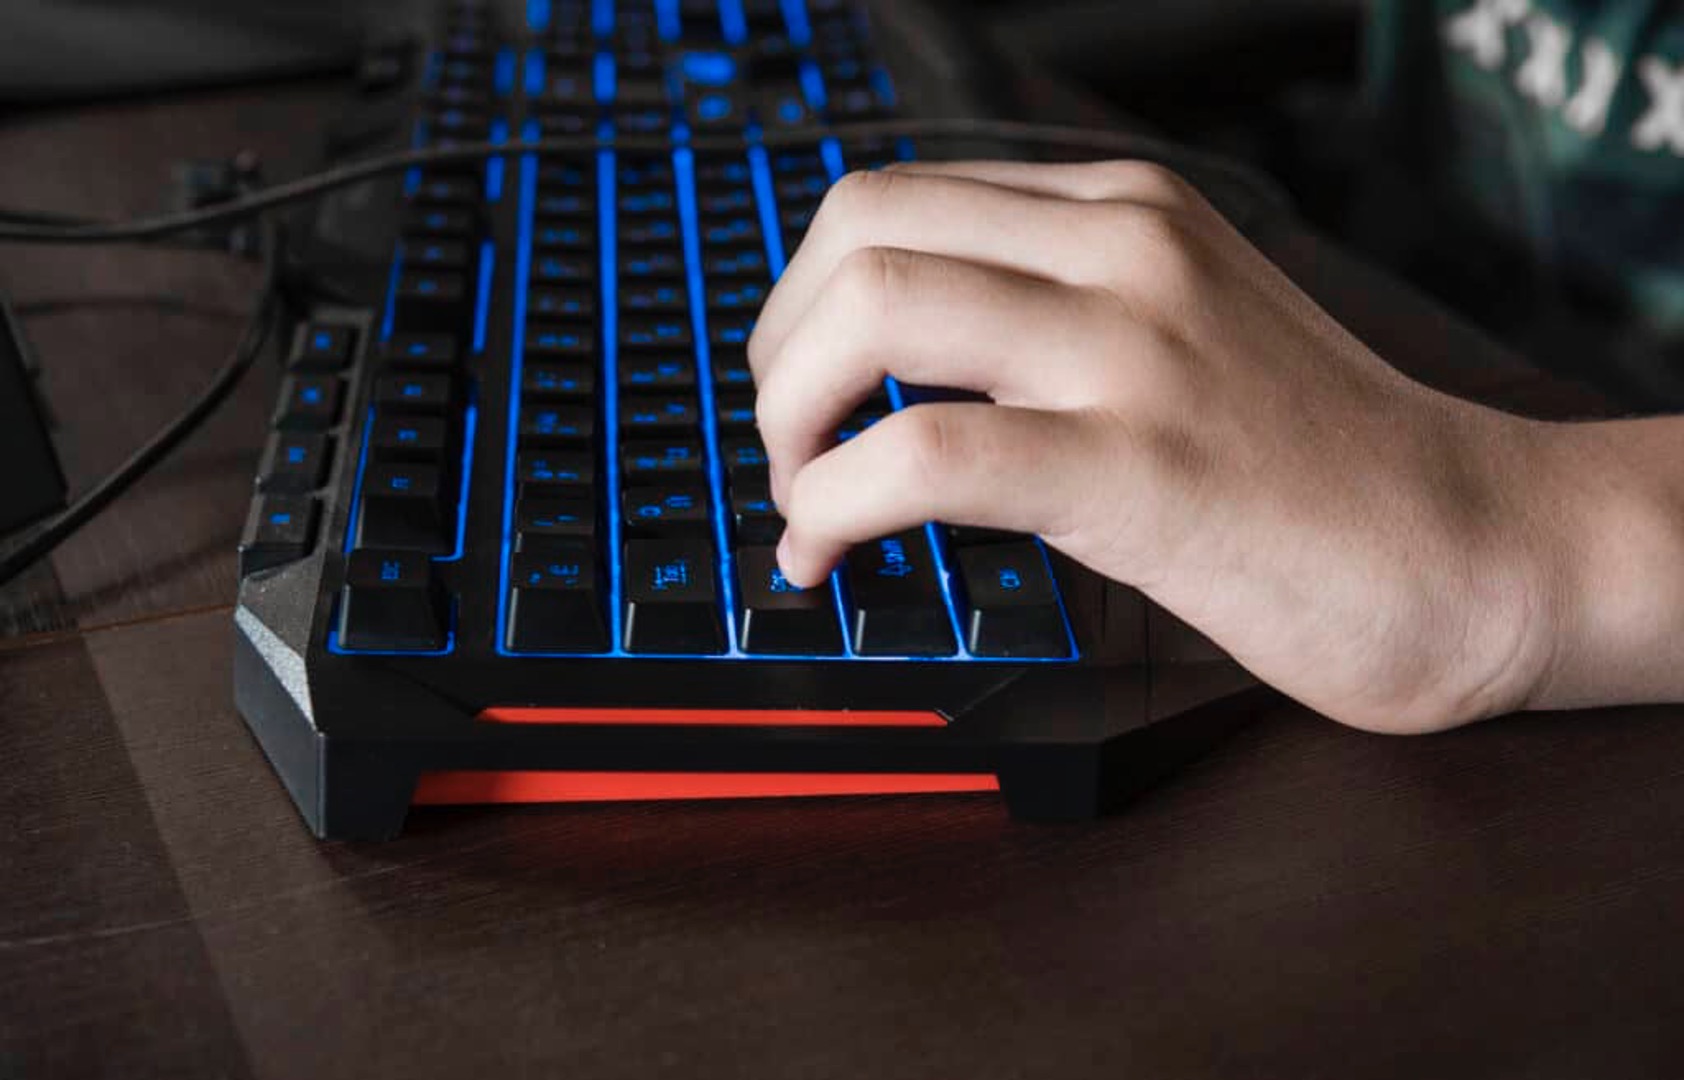 How To Position Your Fingers On A Gaming Keyboard